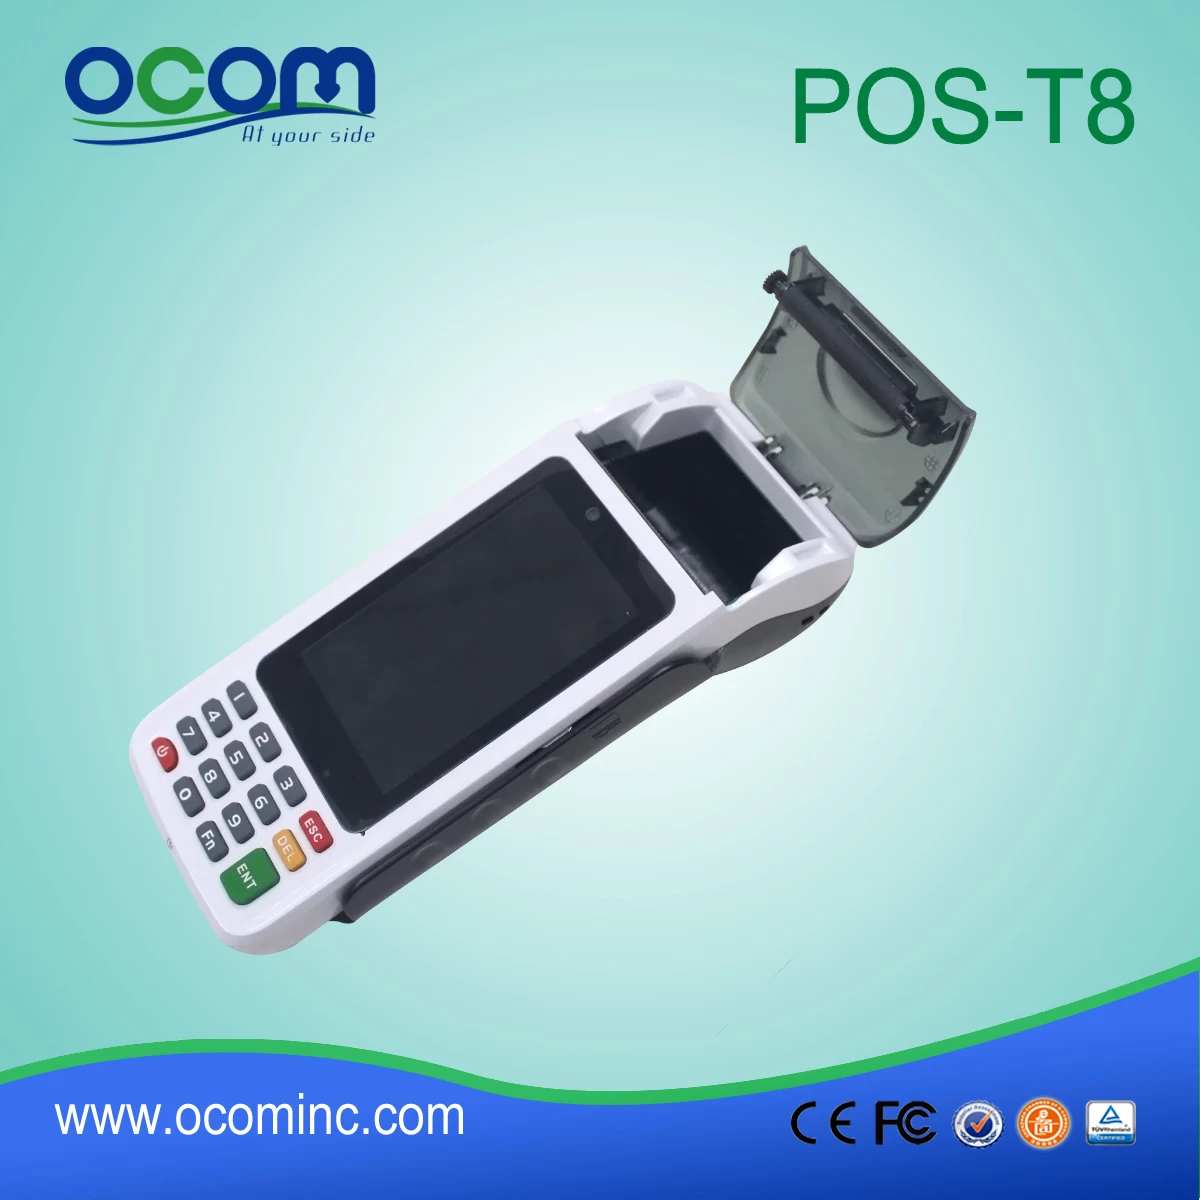 Handheld Android Pos Terminal in Pos System ( POS-T8)